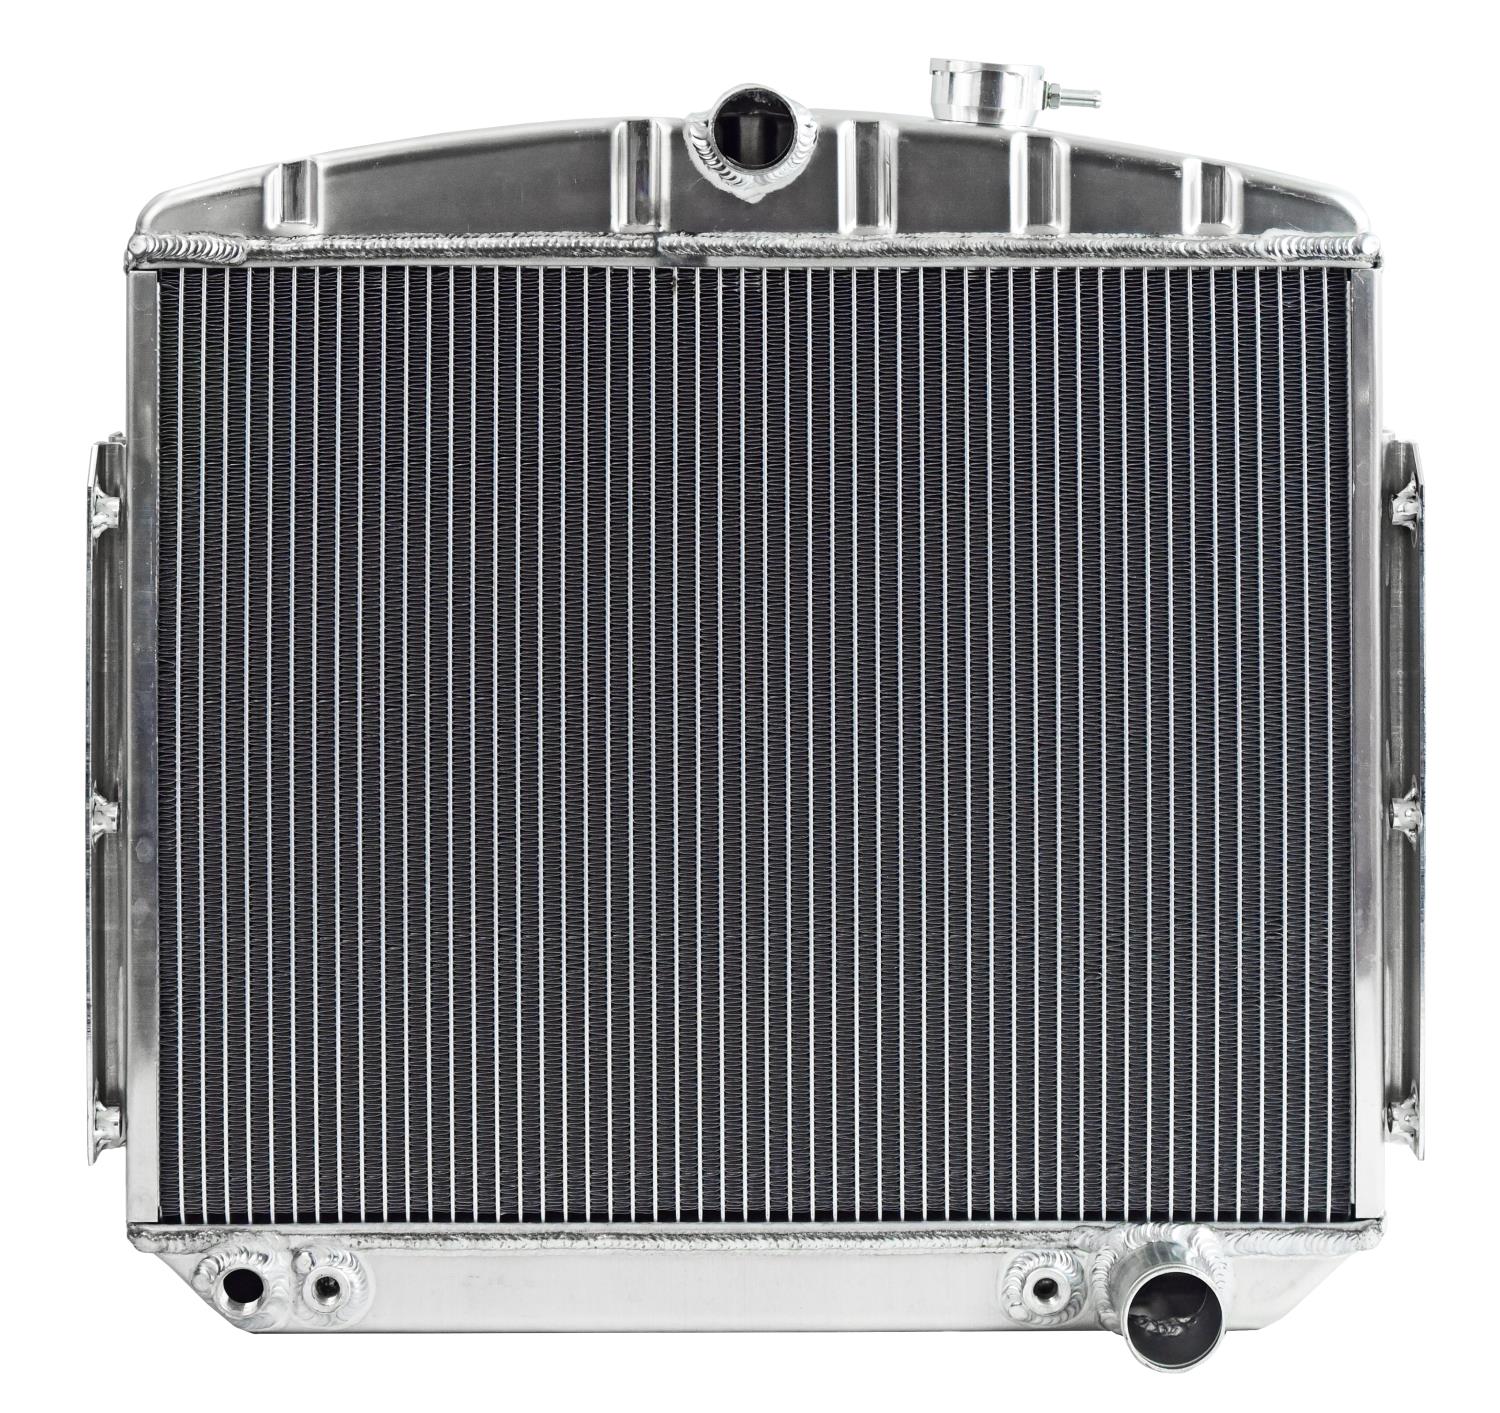 Reproduction Aluminum Radiator for 1955-1956 Chevrolet with V8 or 6 Cylinder Engine